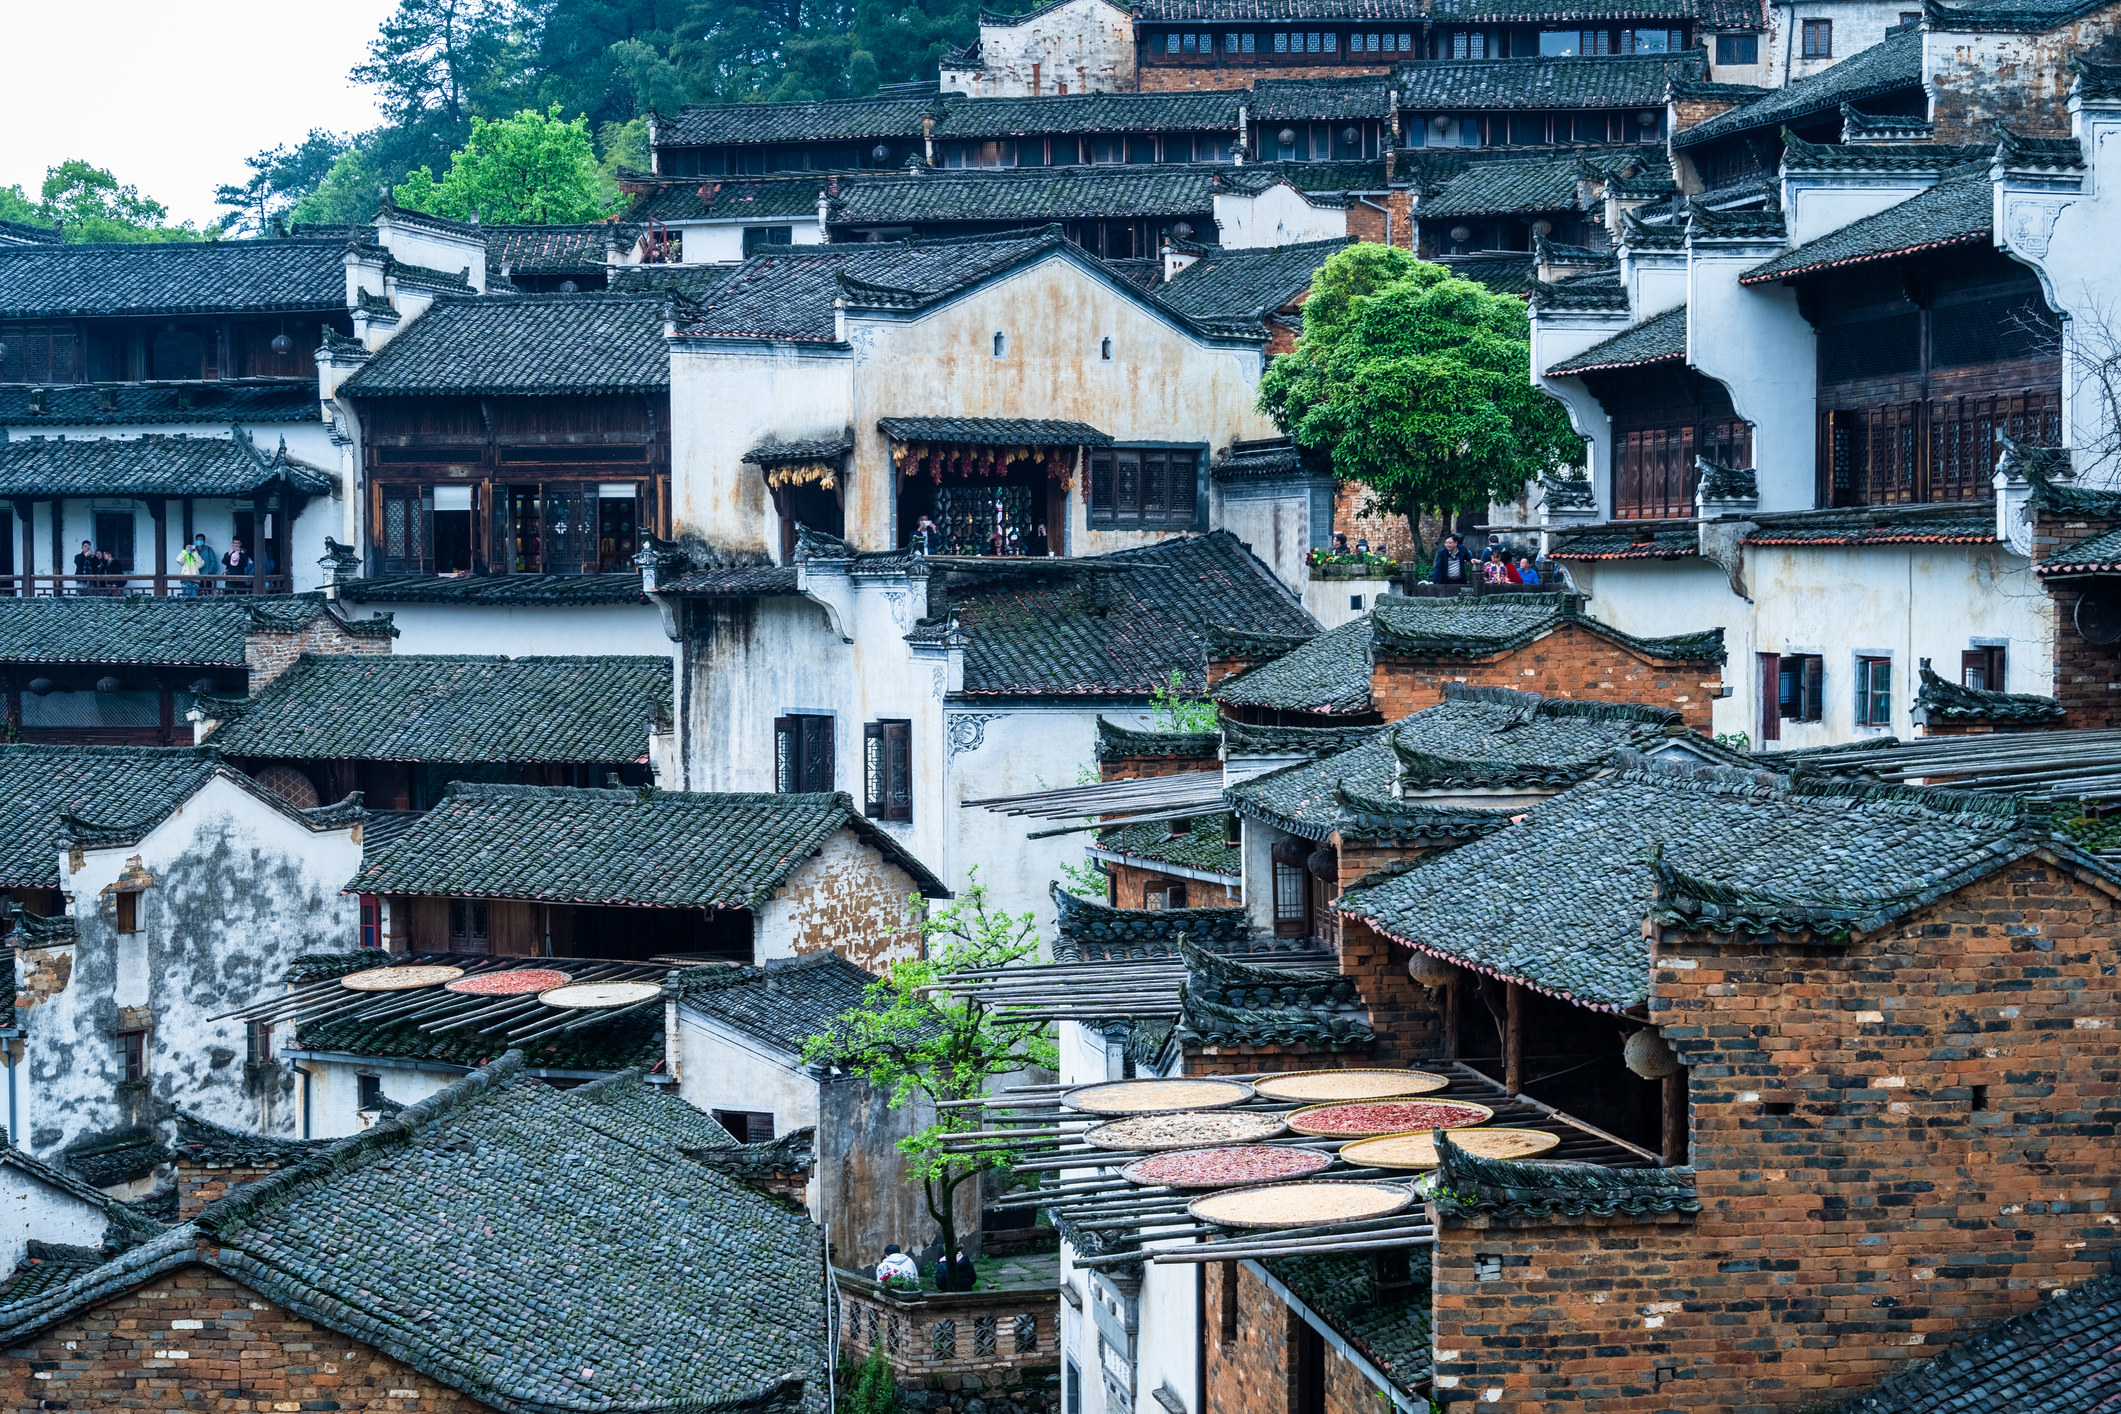 A town in China